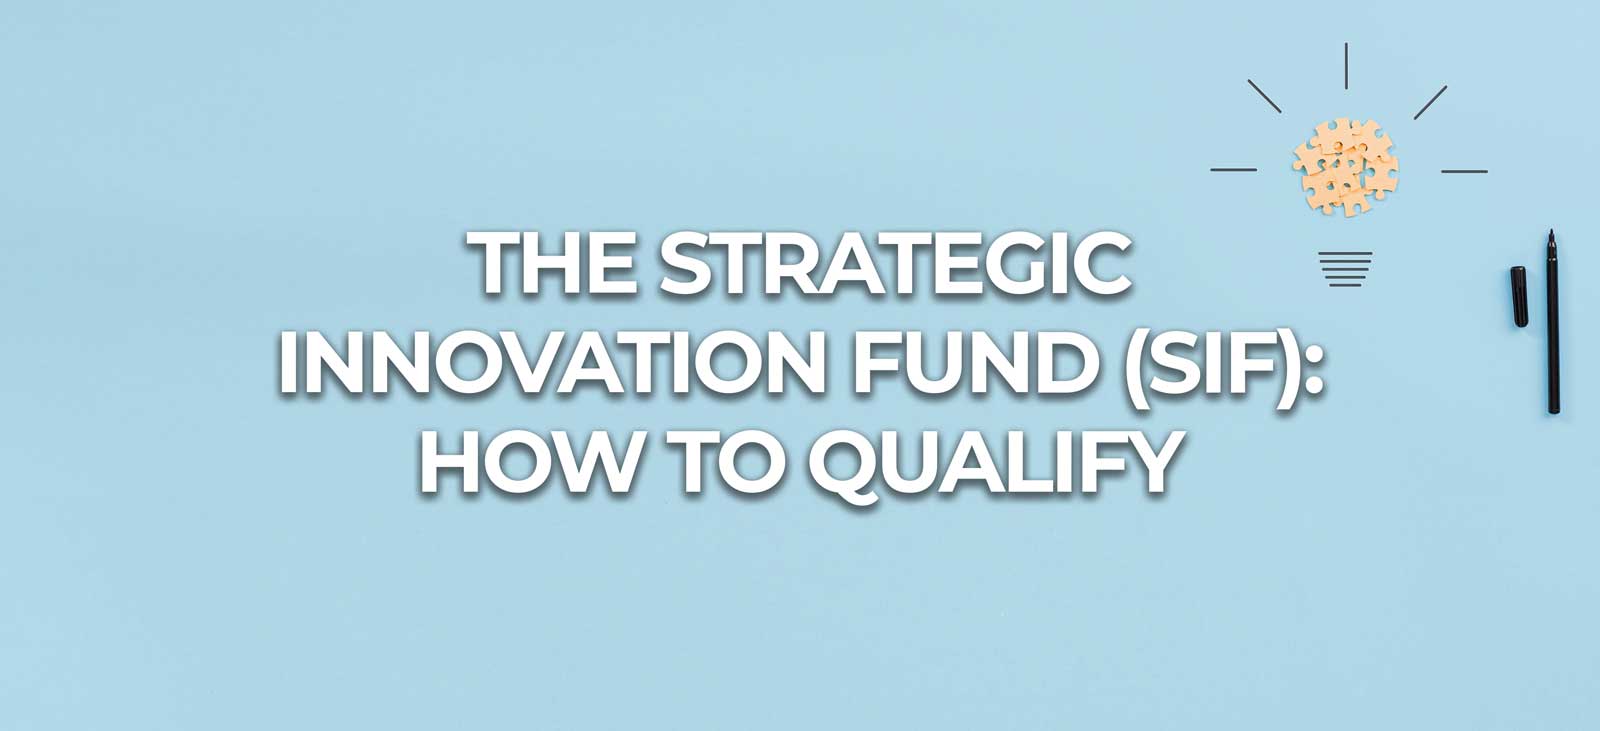 Learn how to qualify for the Strategic Innovation Fund in Canada.